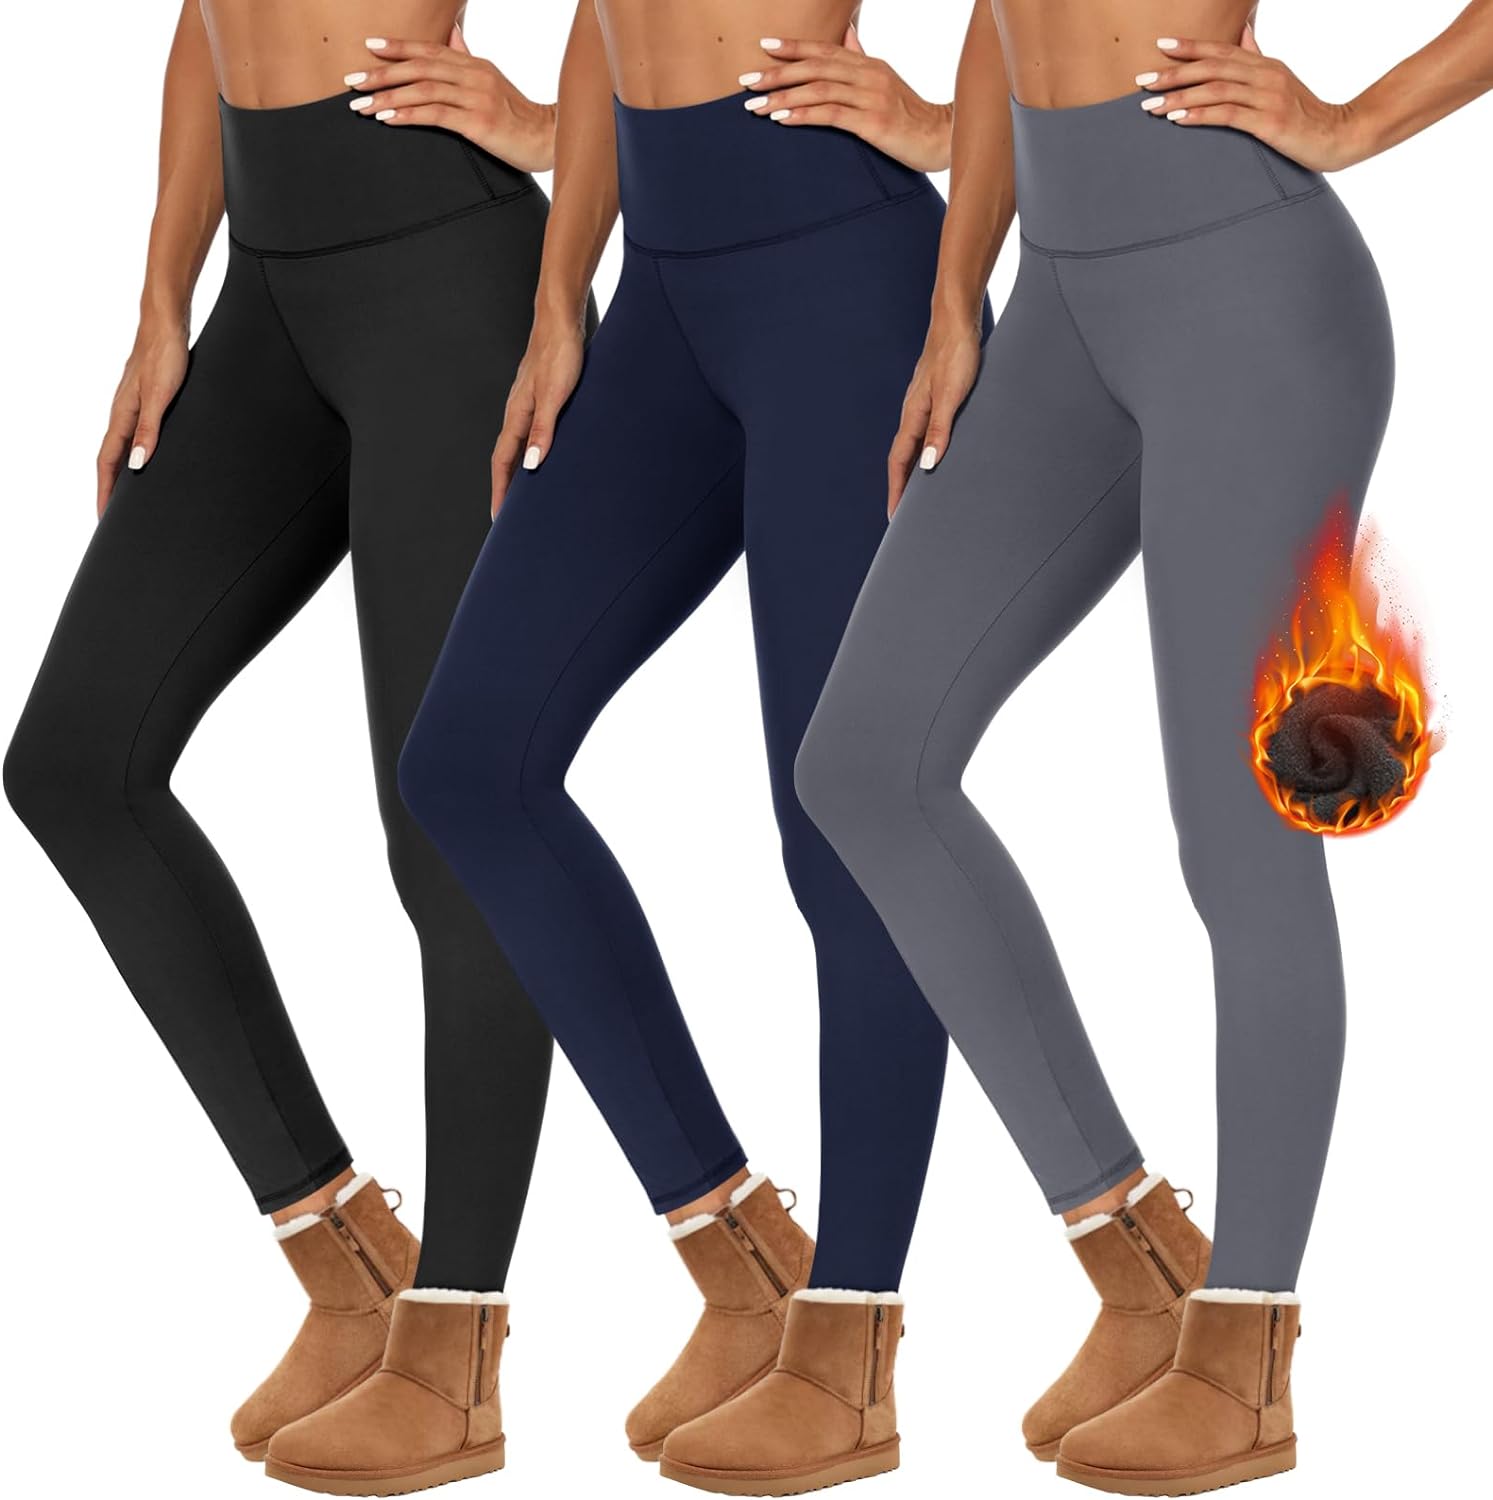 High Waisted Leggings for Women - Soft Athletic Tummy Control Pants for Running Cycling Yoga Workout - Reg Plus Size